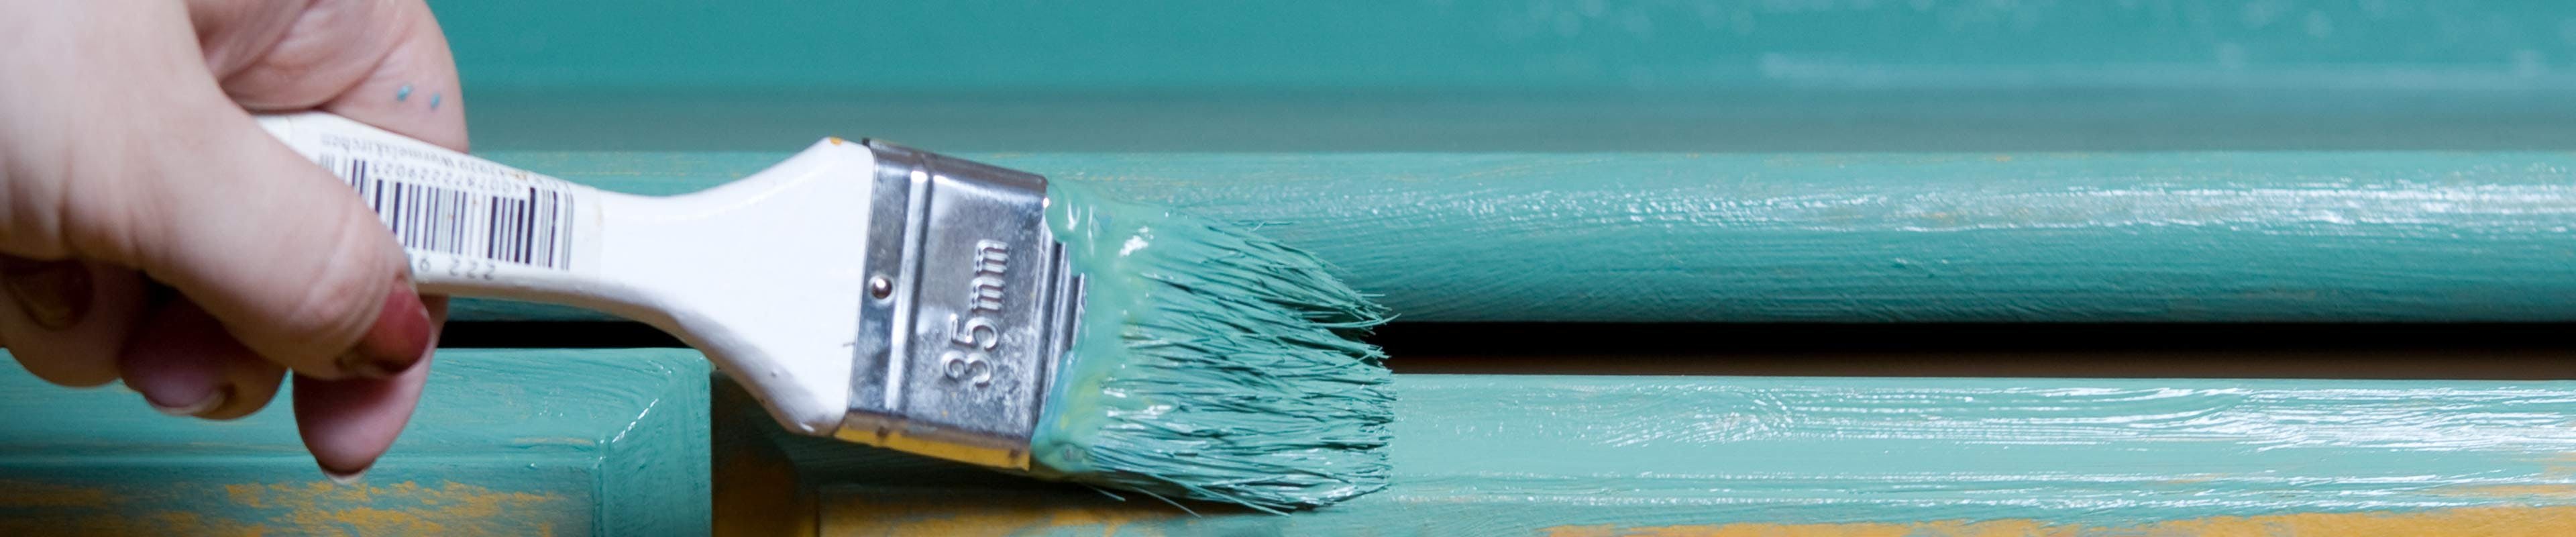 Painting furniture with teal paint